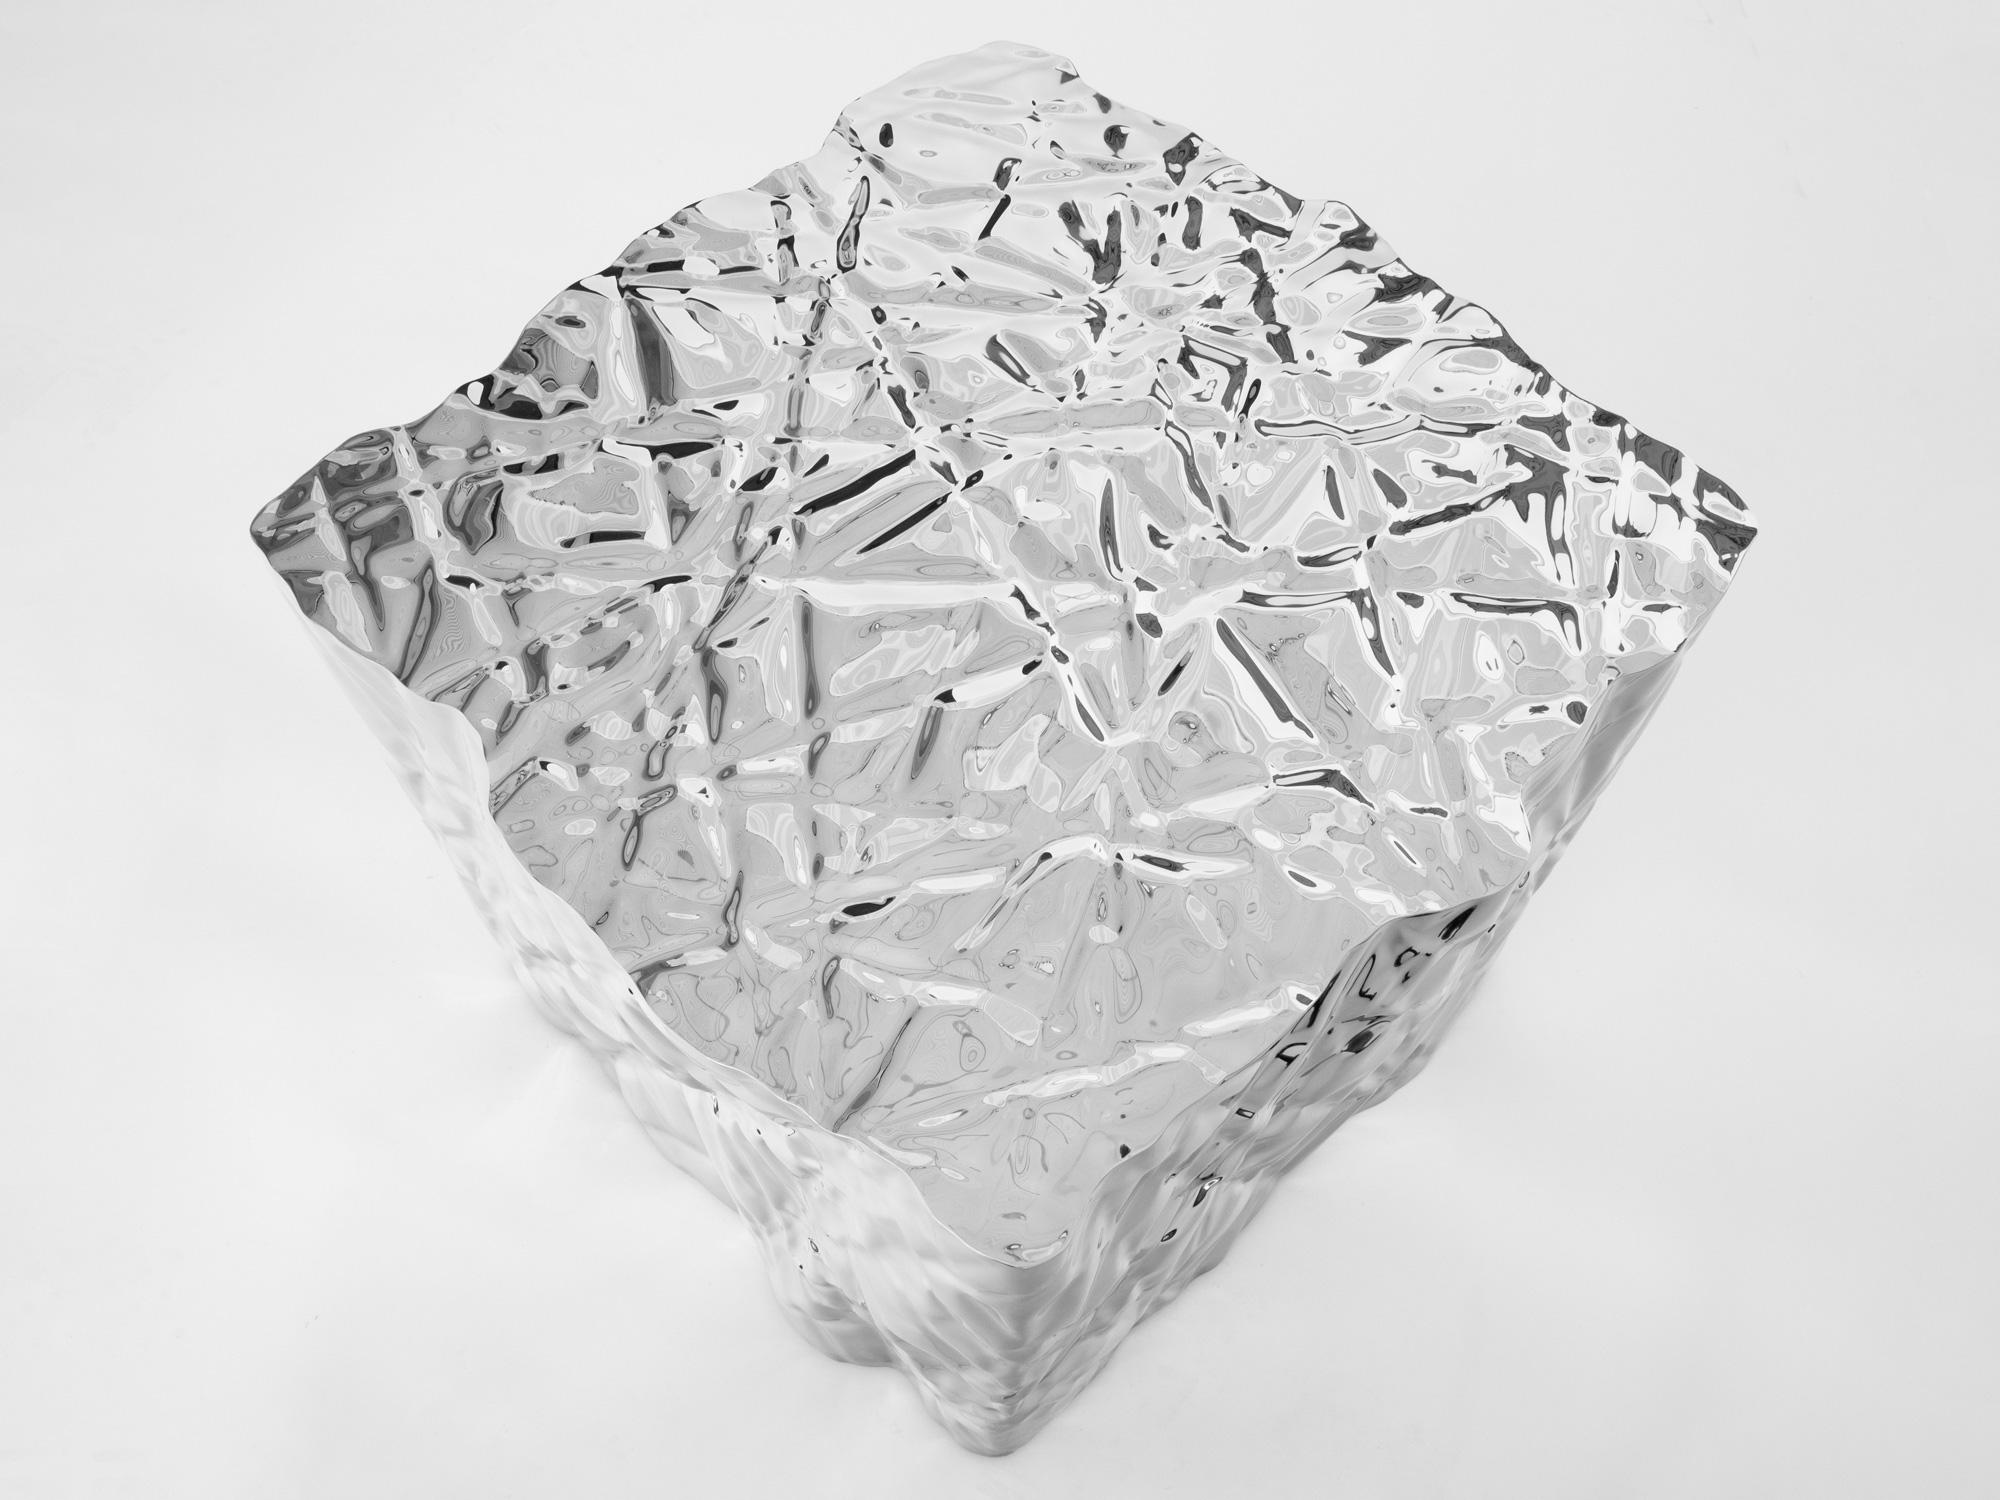 Contemporary Christopher Prinz “Wrinkled Cube Table” in Mirror Polished Stainless Steel For Sale